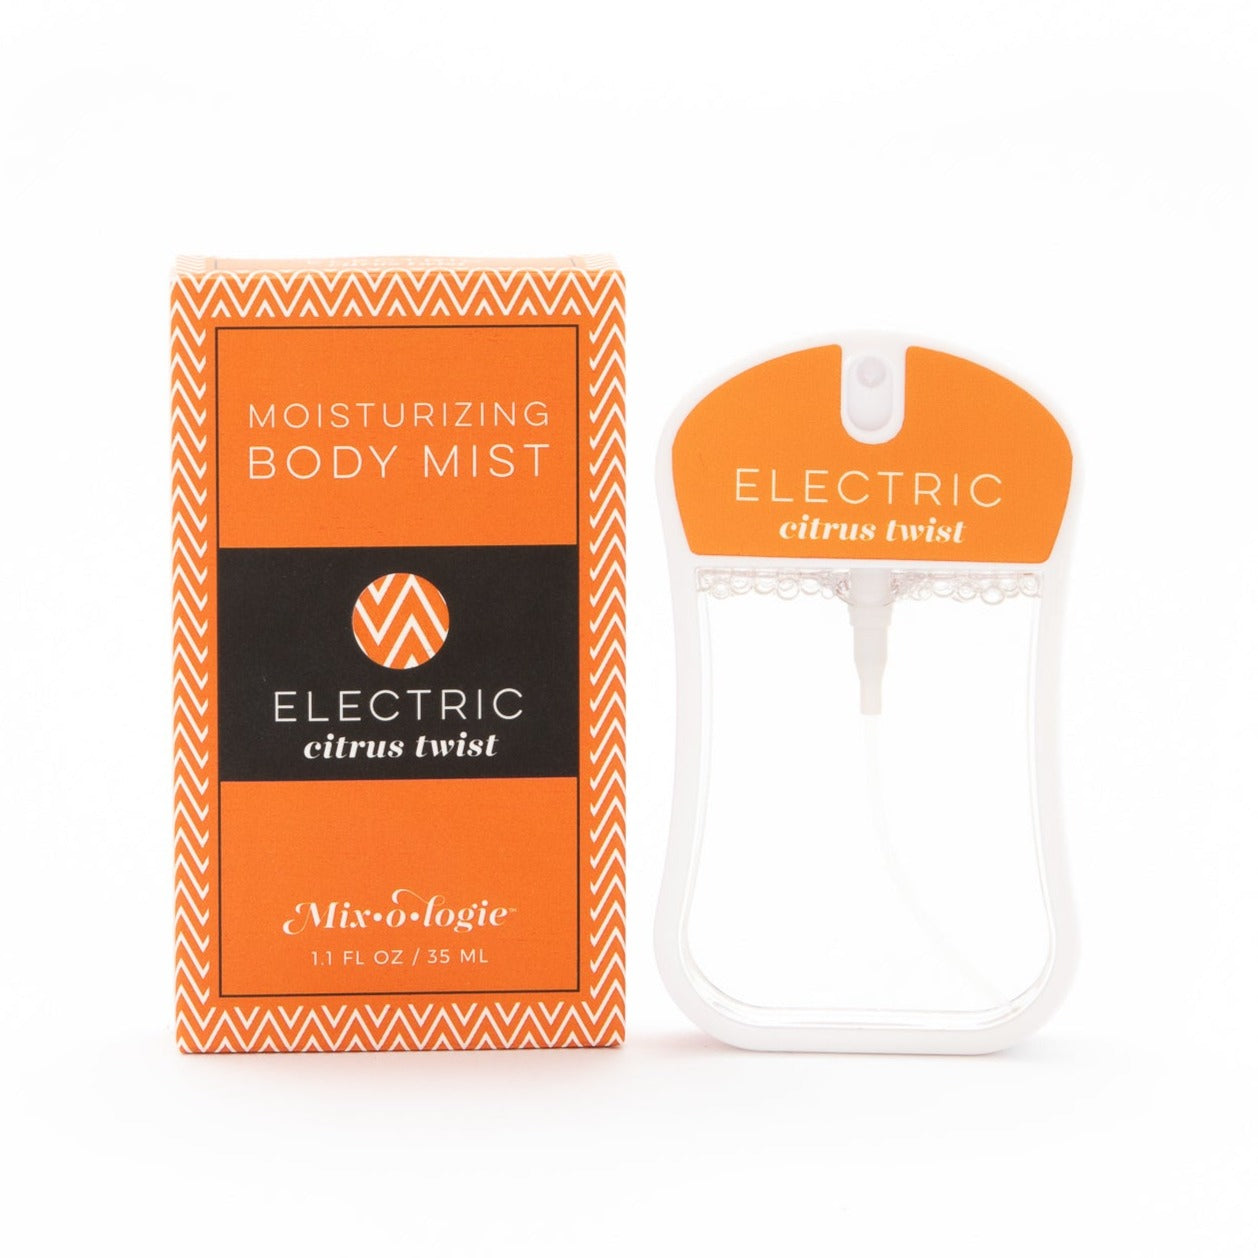 Moisturizing body mist scented with Electric (citrus twist) scent in 35 mL plastic spray bottle displayed with rectangular packaging